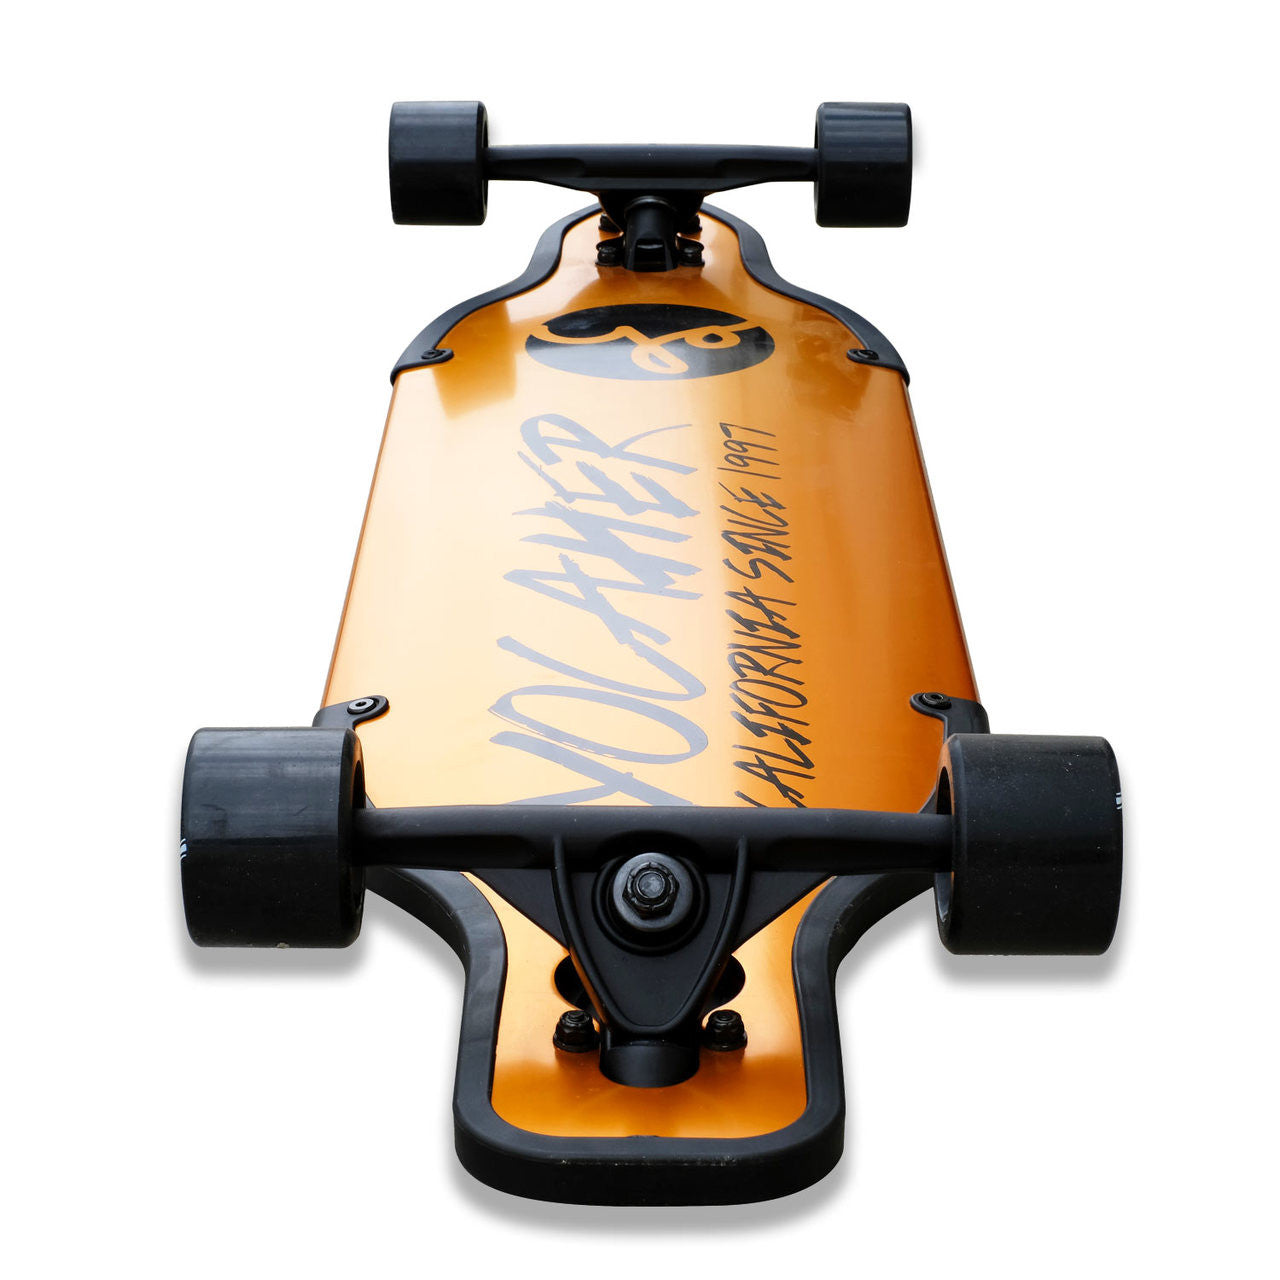 Yocaher Aluminum Drop Through longboard Complete  - Gold